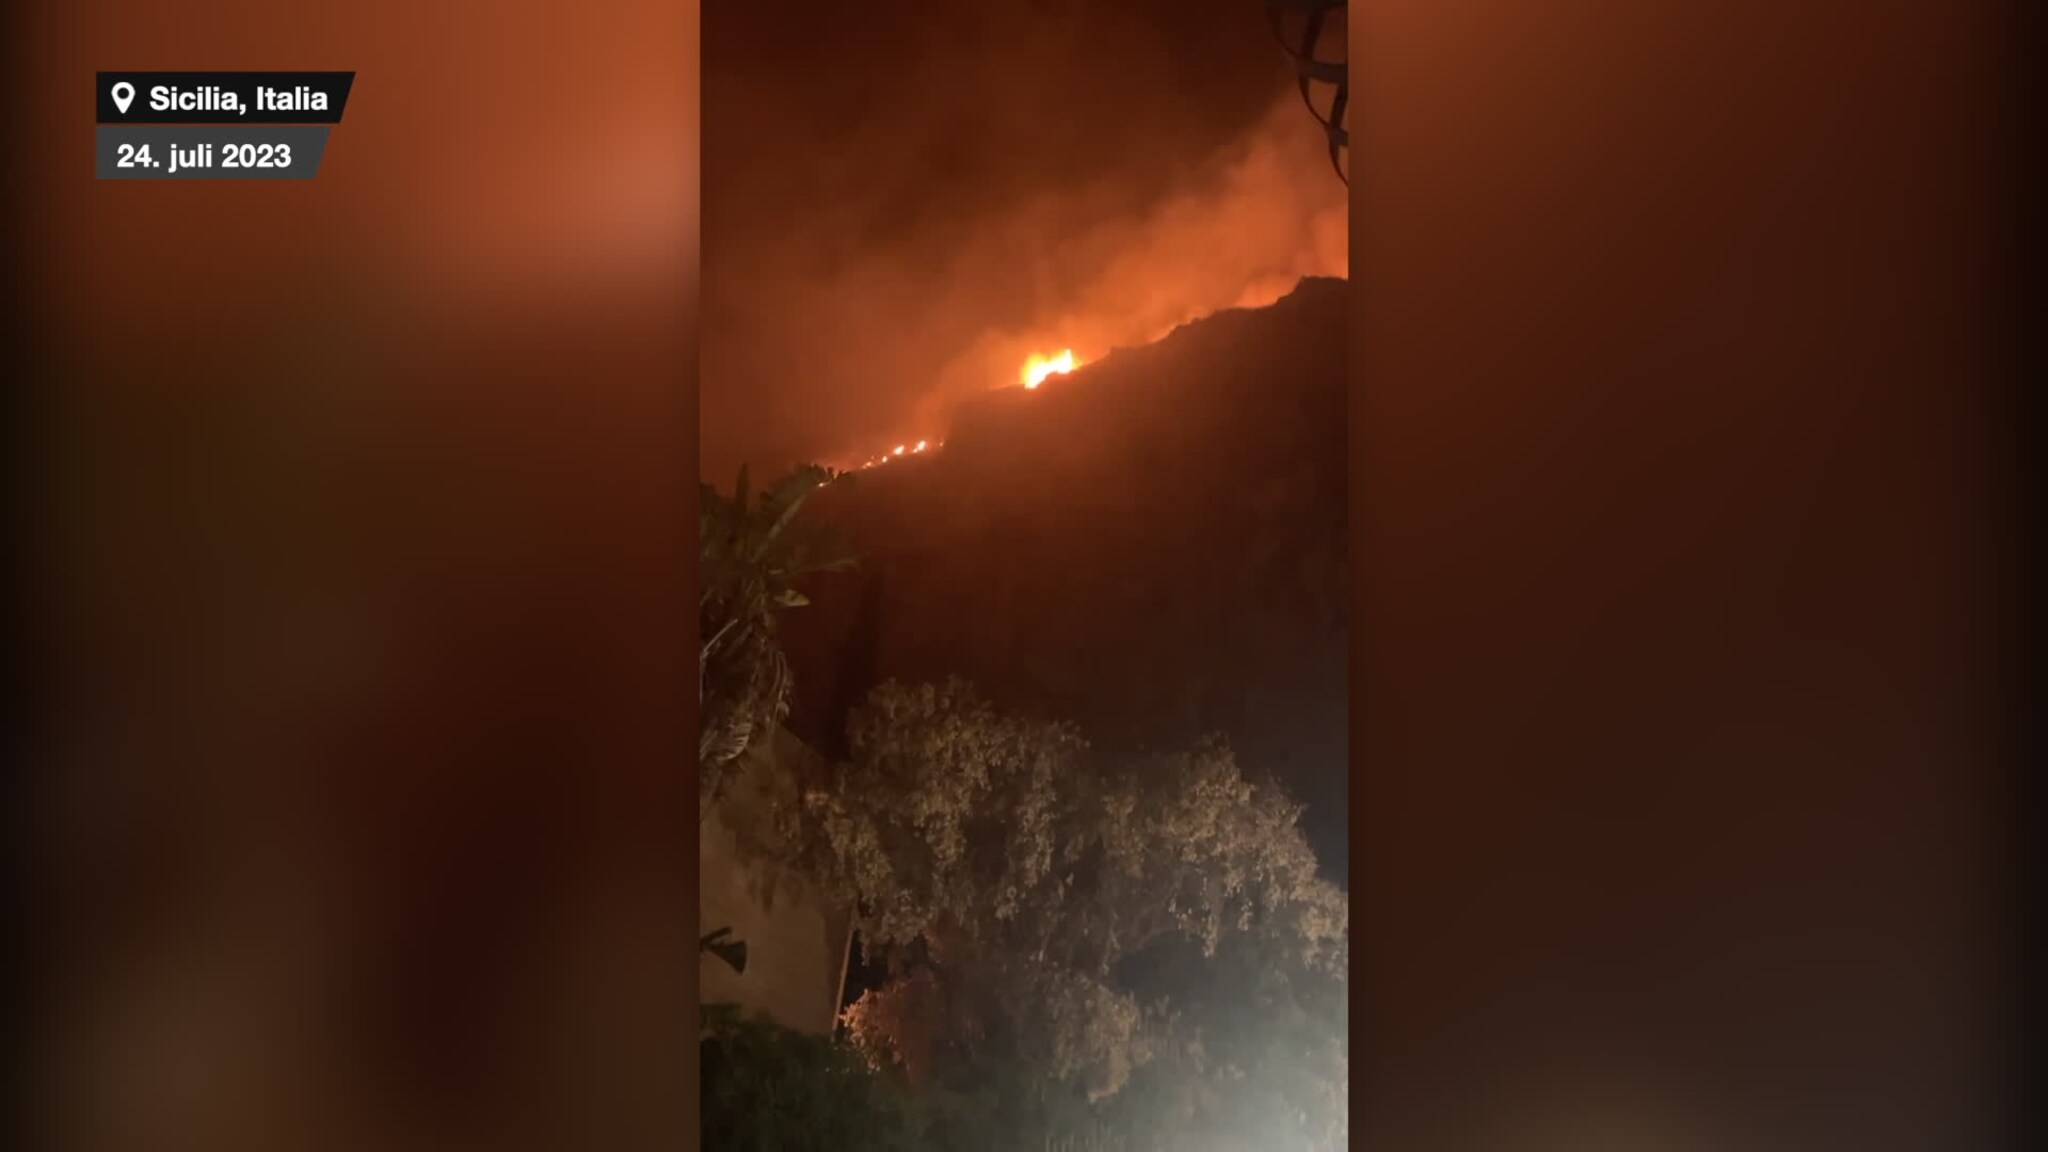 Forest fires in Sicily: – The neighbors said we had to run